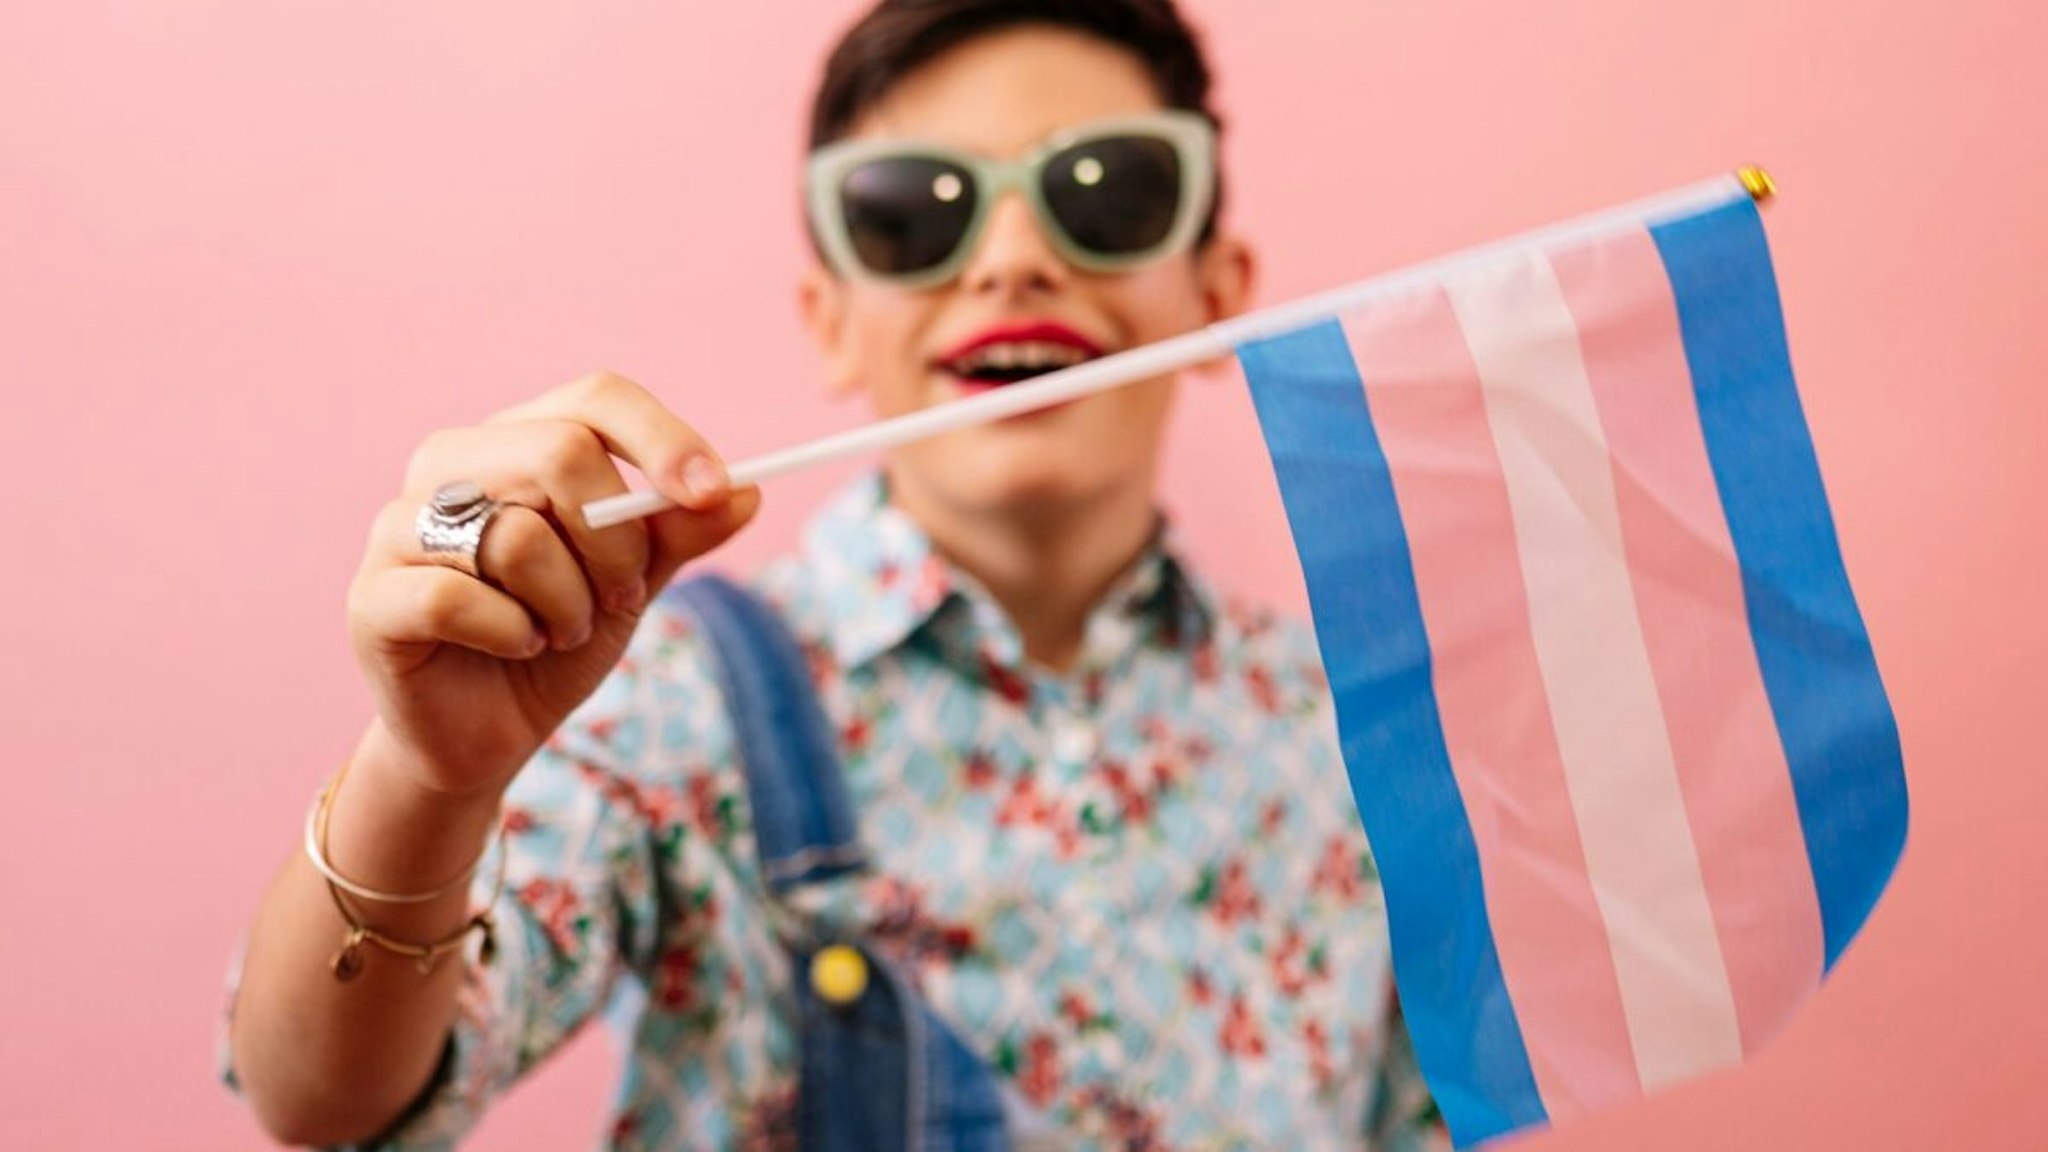 Young boy feeling girly and holding a trans flag.